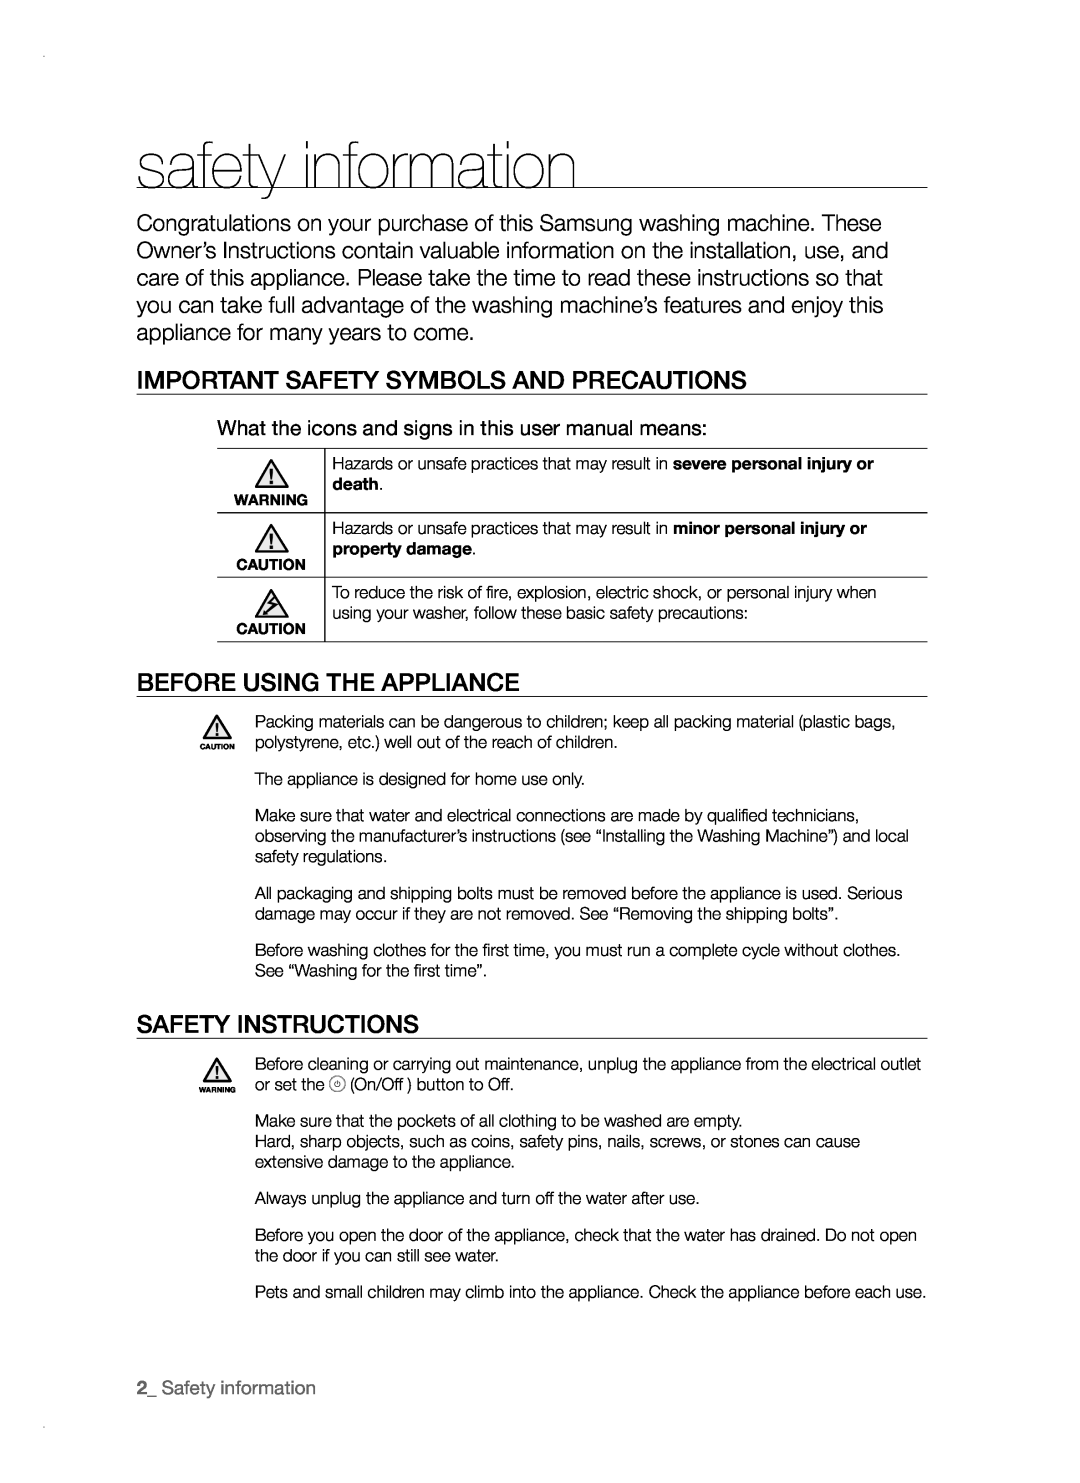 Samsung WF-F1061, WF-F1261 safety information, Important Safety Symbols And Precautions, Before Using The Appliance 